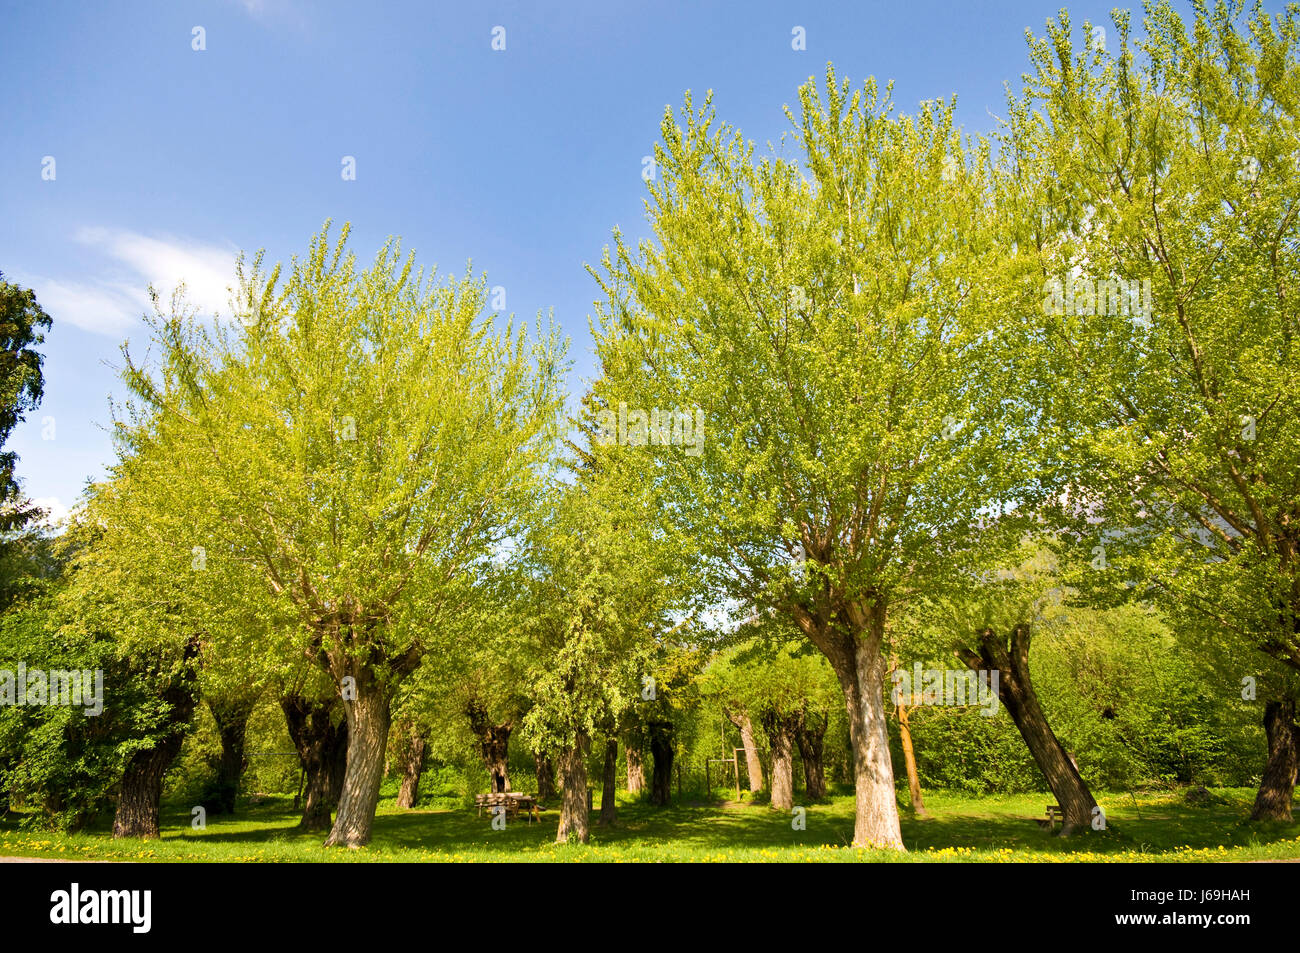 tree trees green spring browse forest willow worms eye tree trees green leaves Stock Photo